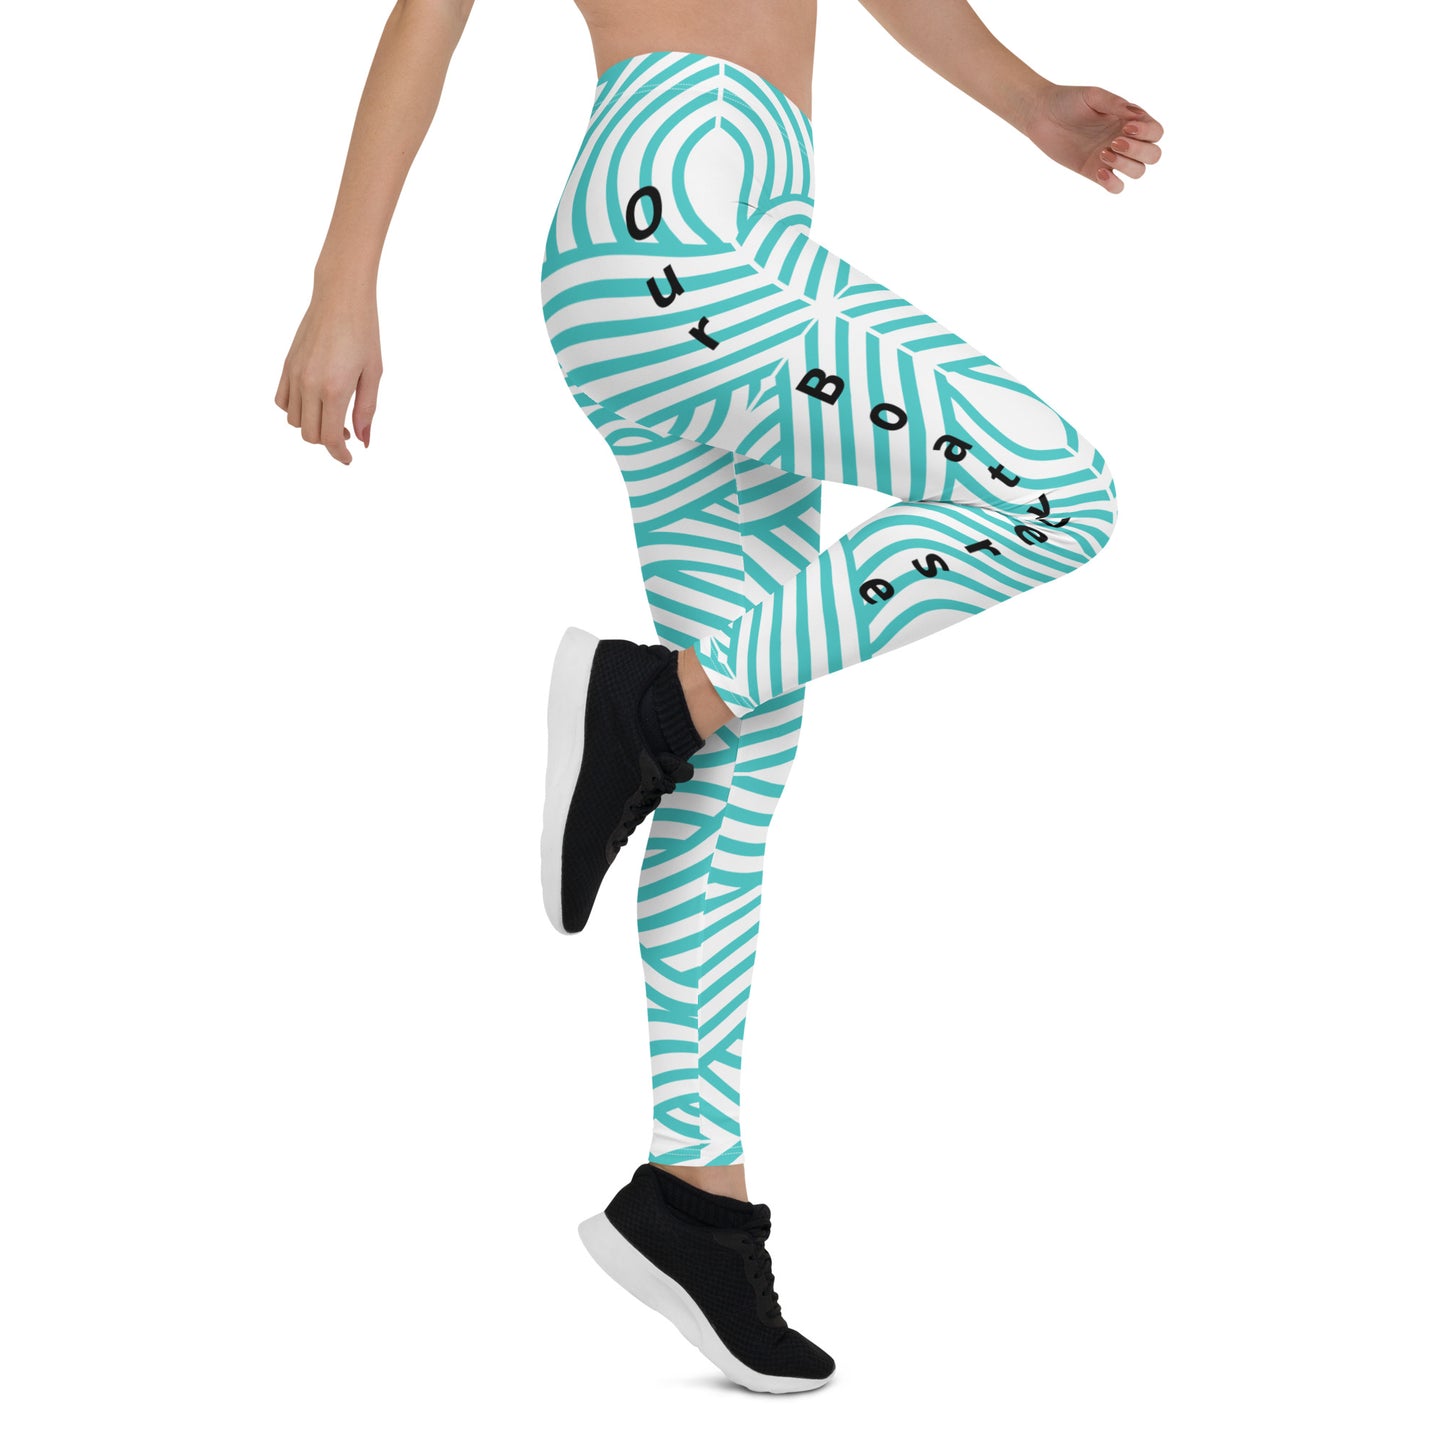 Funky Bright Green Gym Leggings from Our BoatyVerse